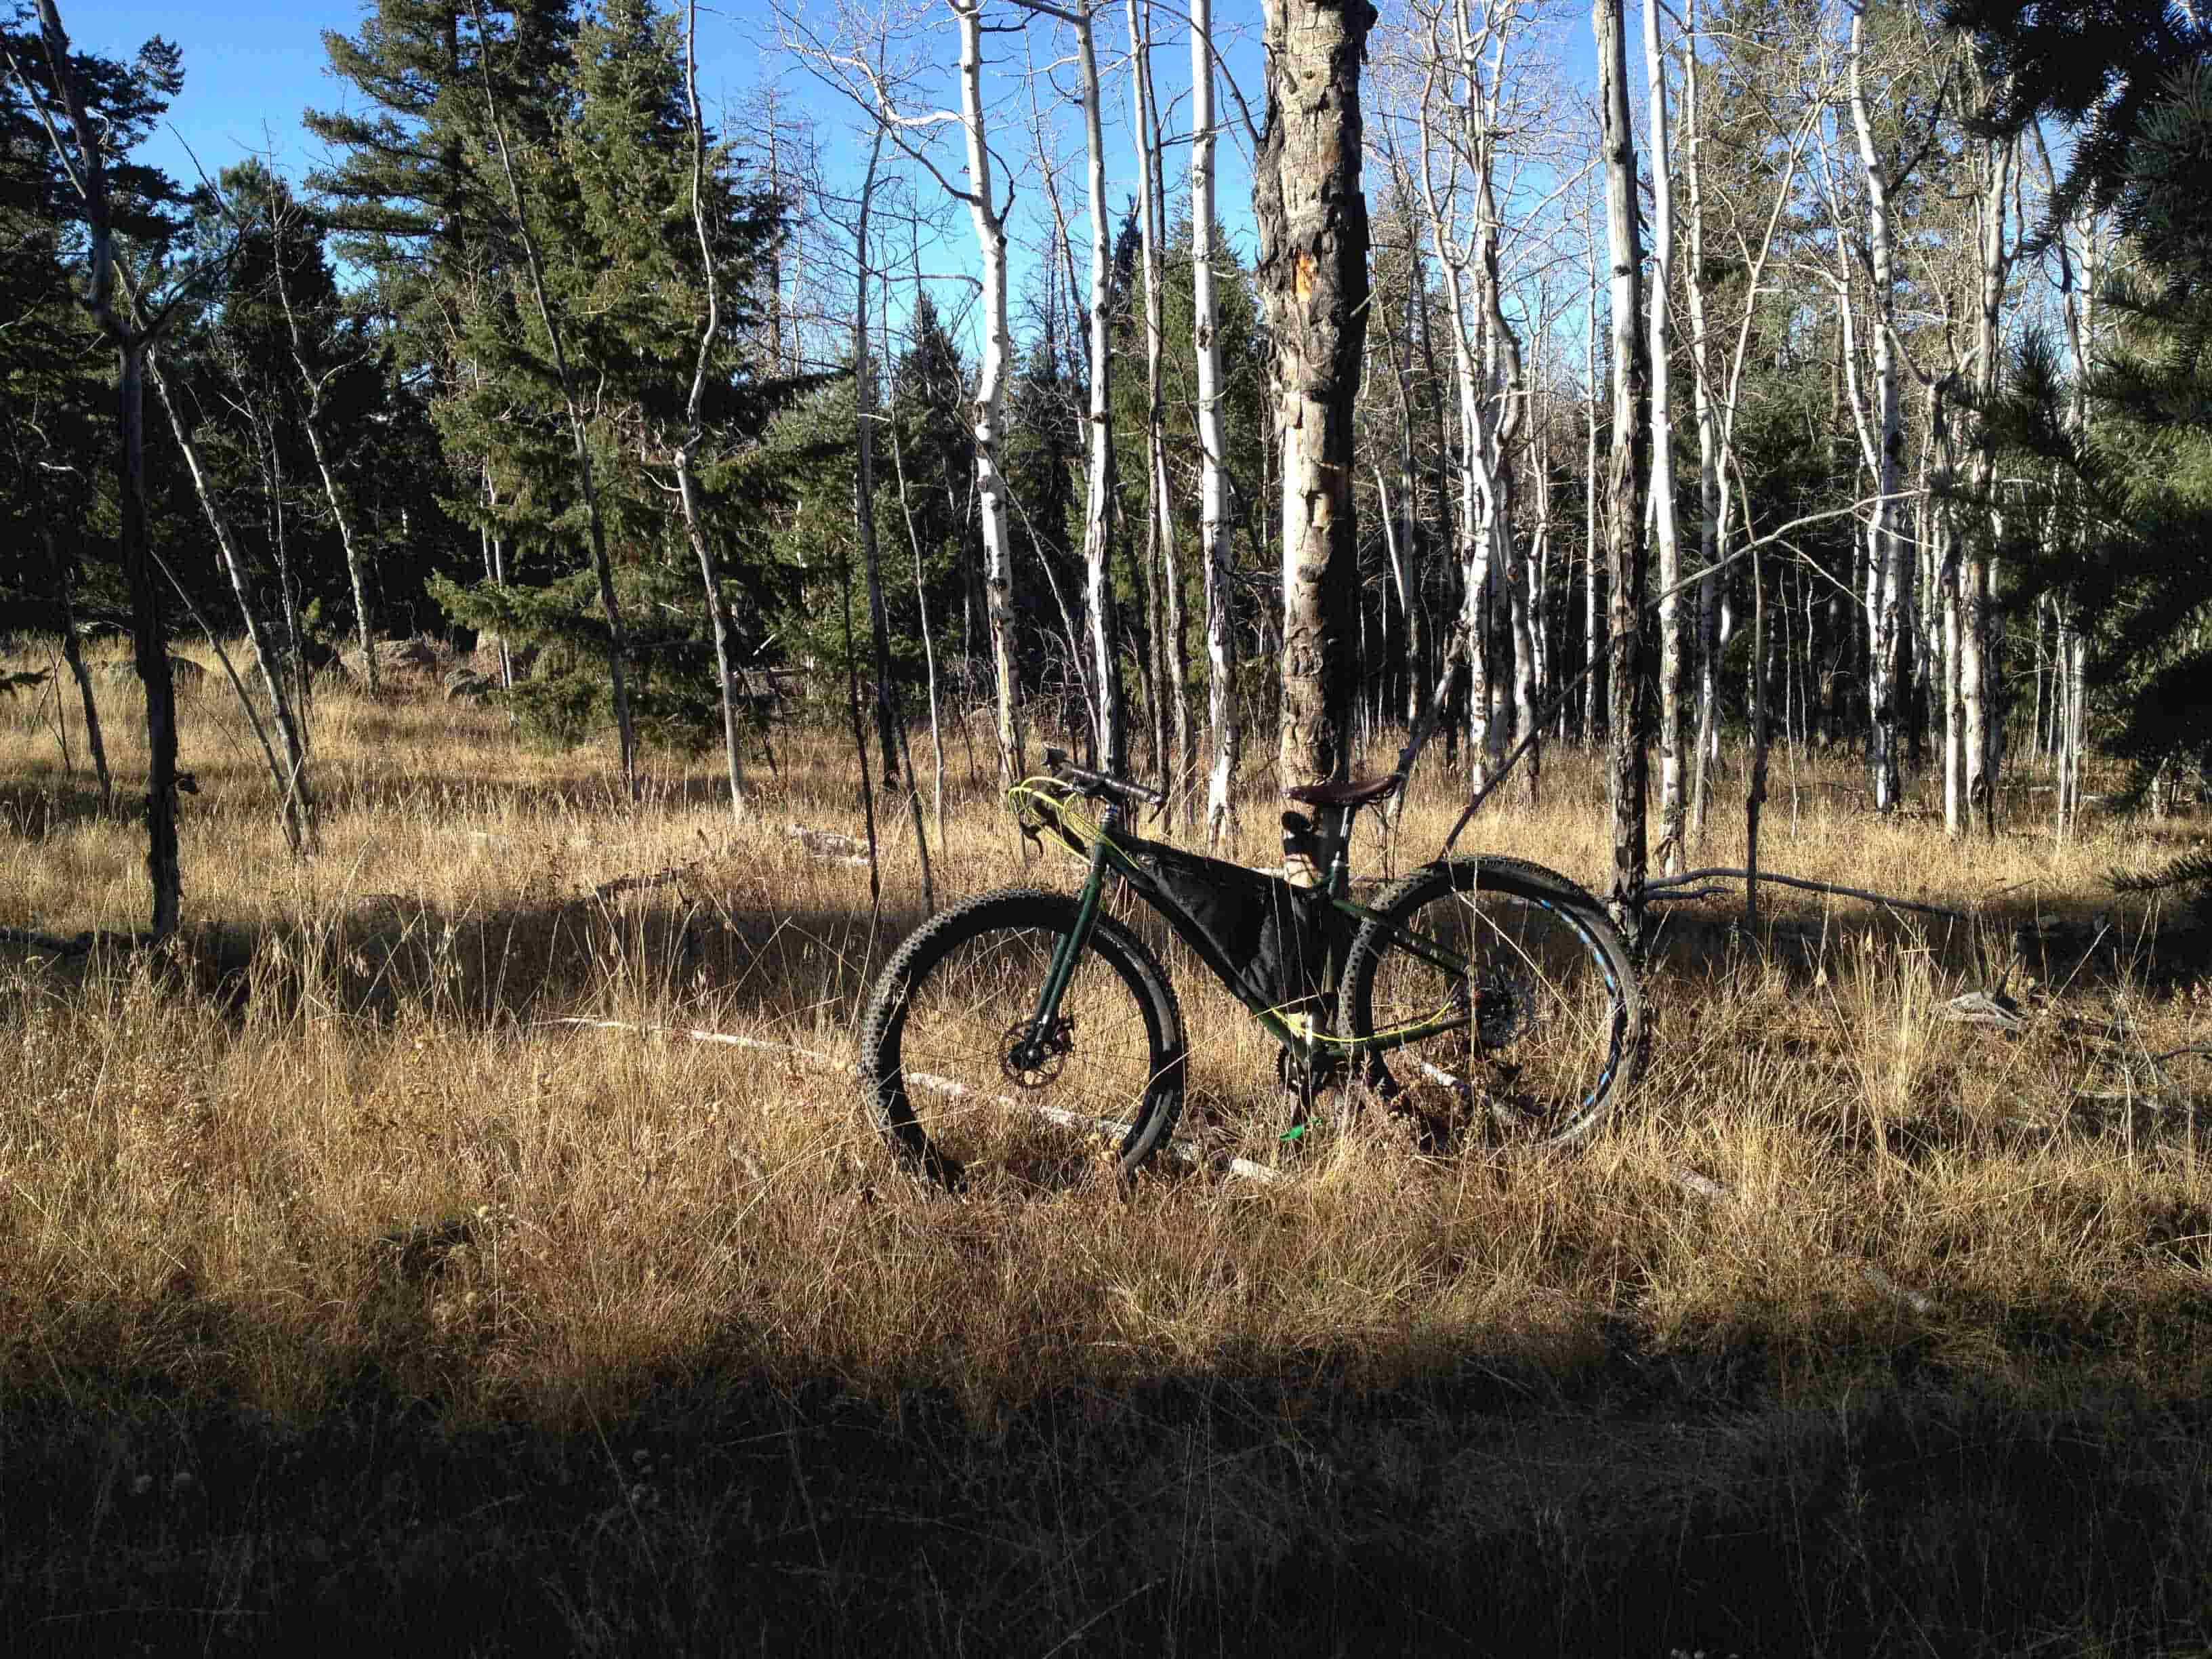 Left side view of a green Surly Krampus bike, leaning against a tree in an area of brown grass, in the woods